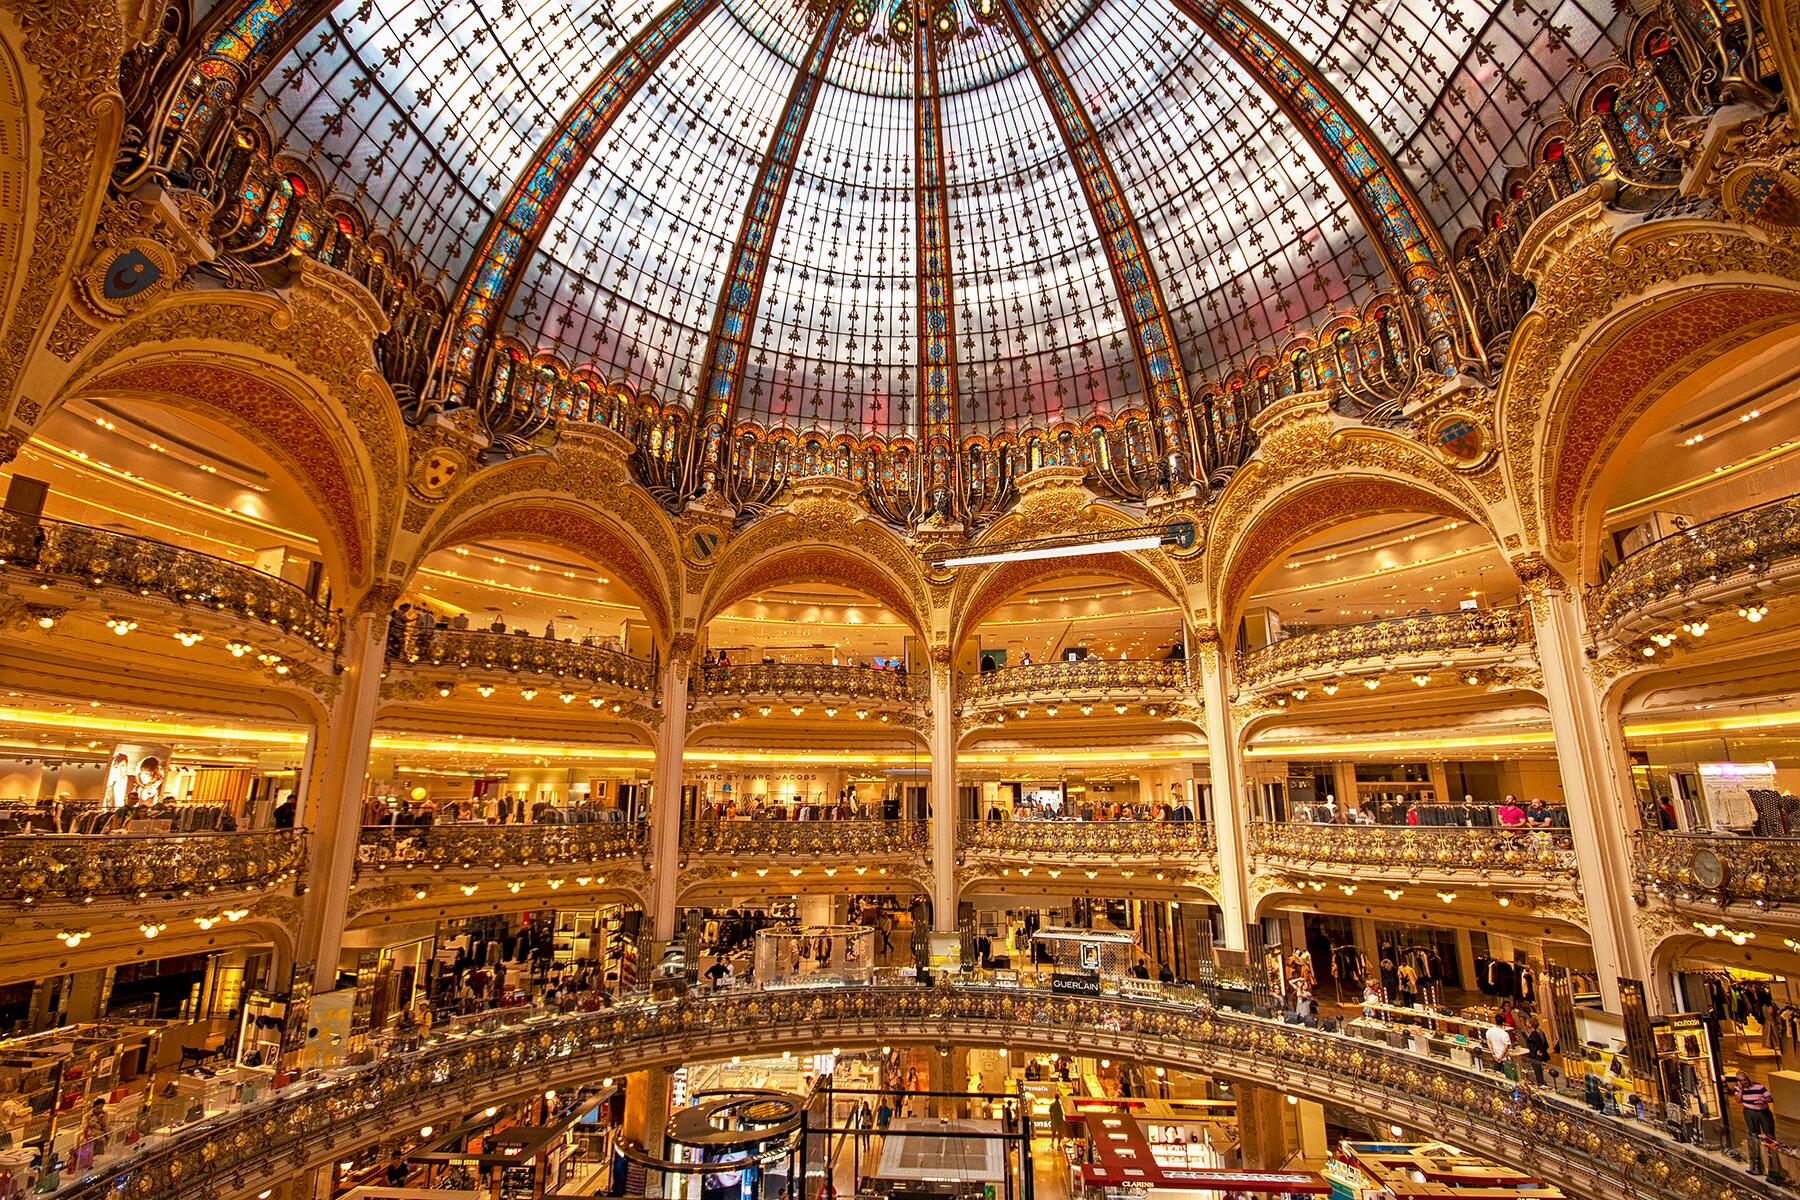 Paris' Best Stores and Hotels to See Amazing Architecture